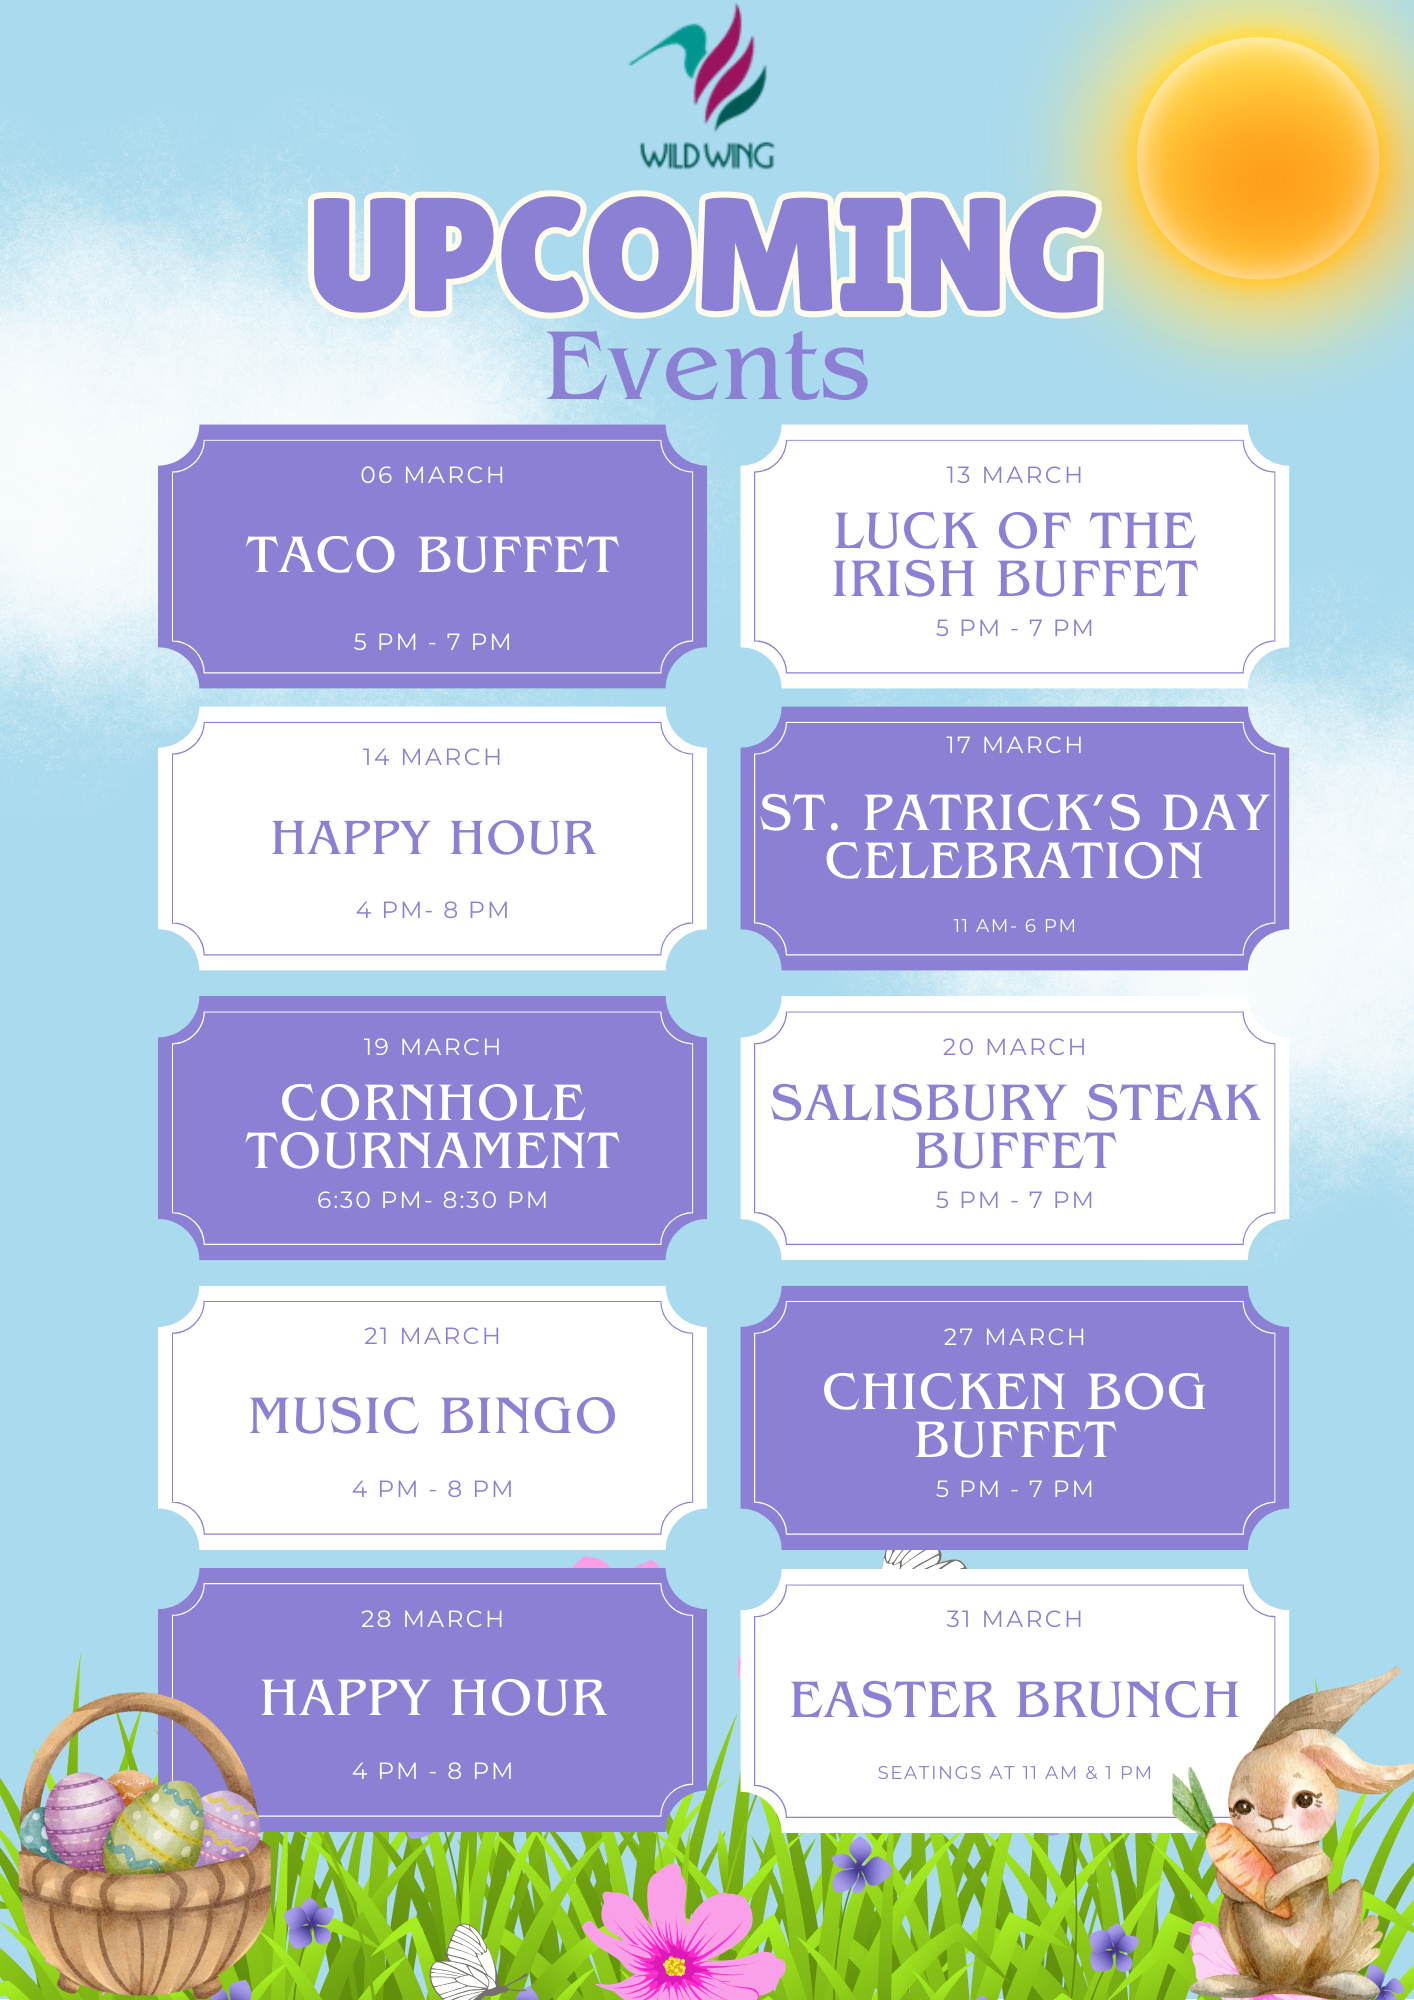 Image: Wild Wing March Events